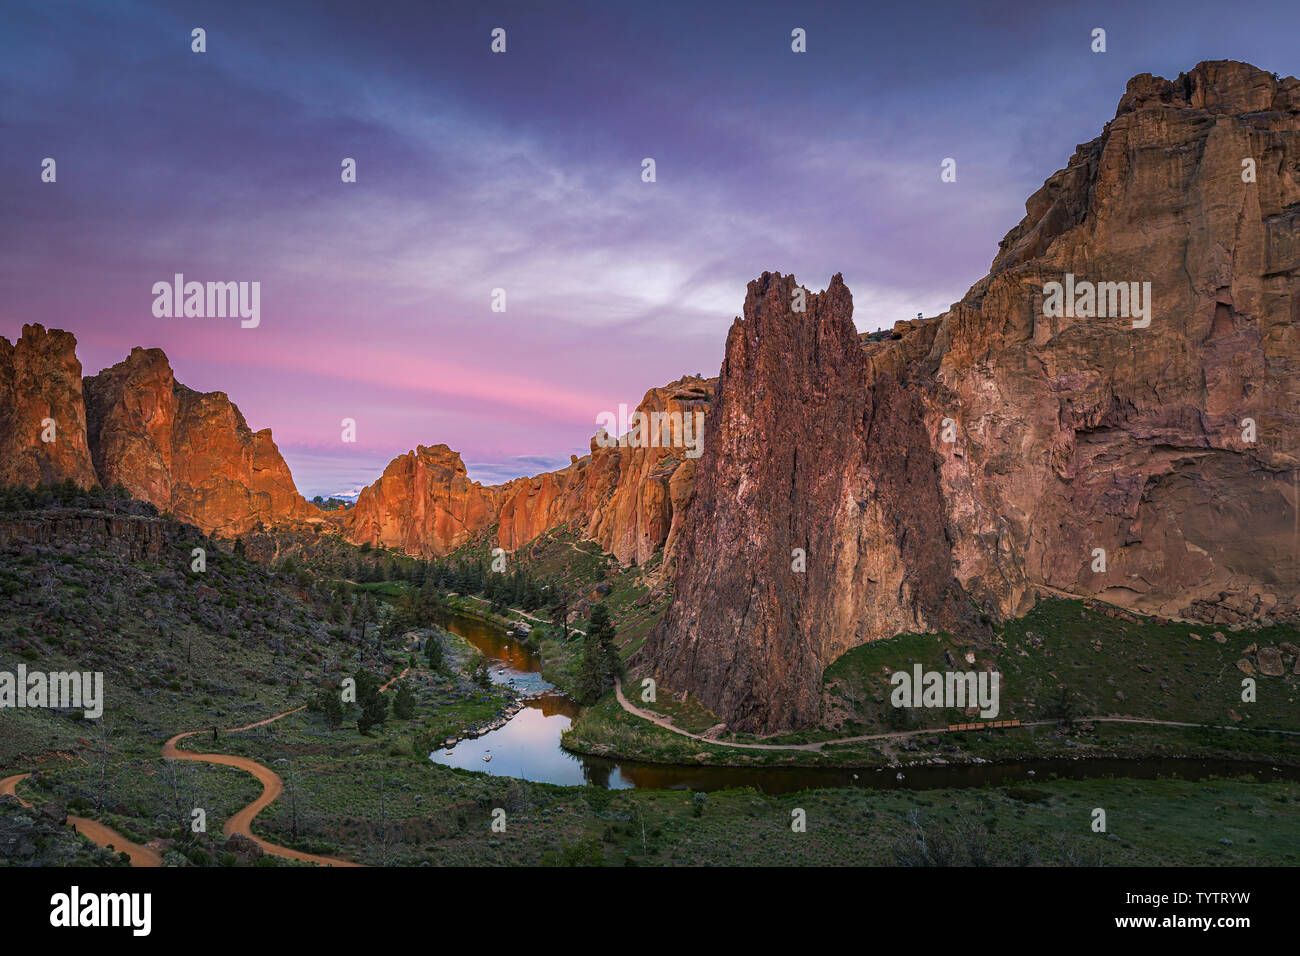 Smith Rock State Park is an American state park located in central Oregon's High Desert near the communities of Redmond and Terrebonne. Its sheer clif Stock Photo